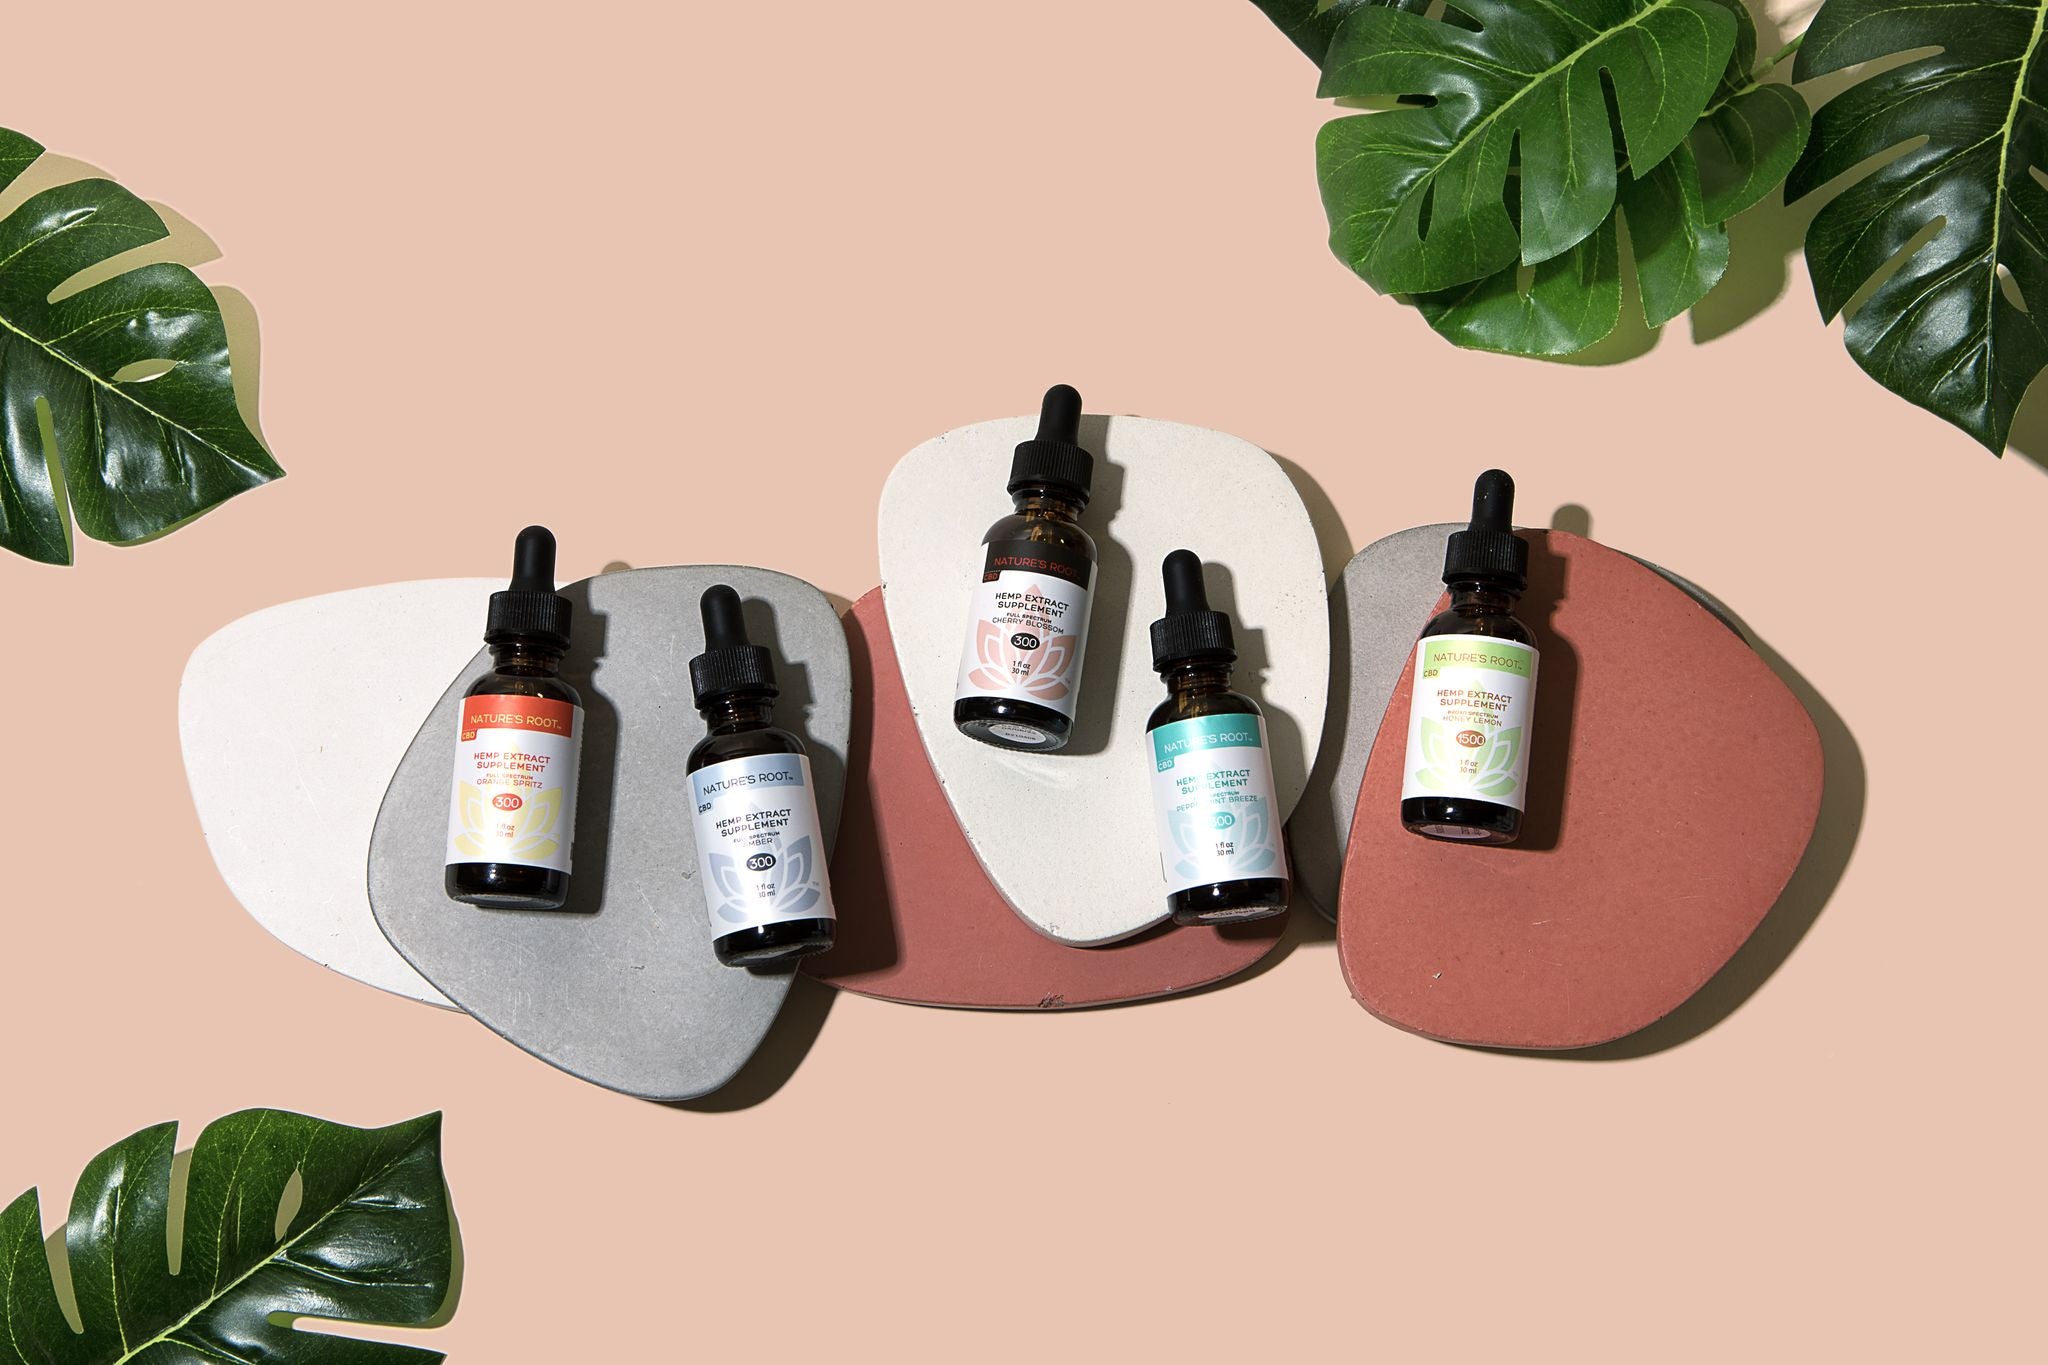 Hemp and CBD products for the mind and body by Nature's Root